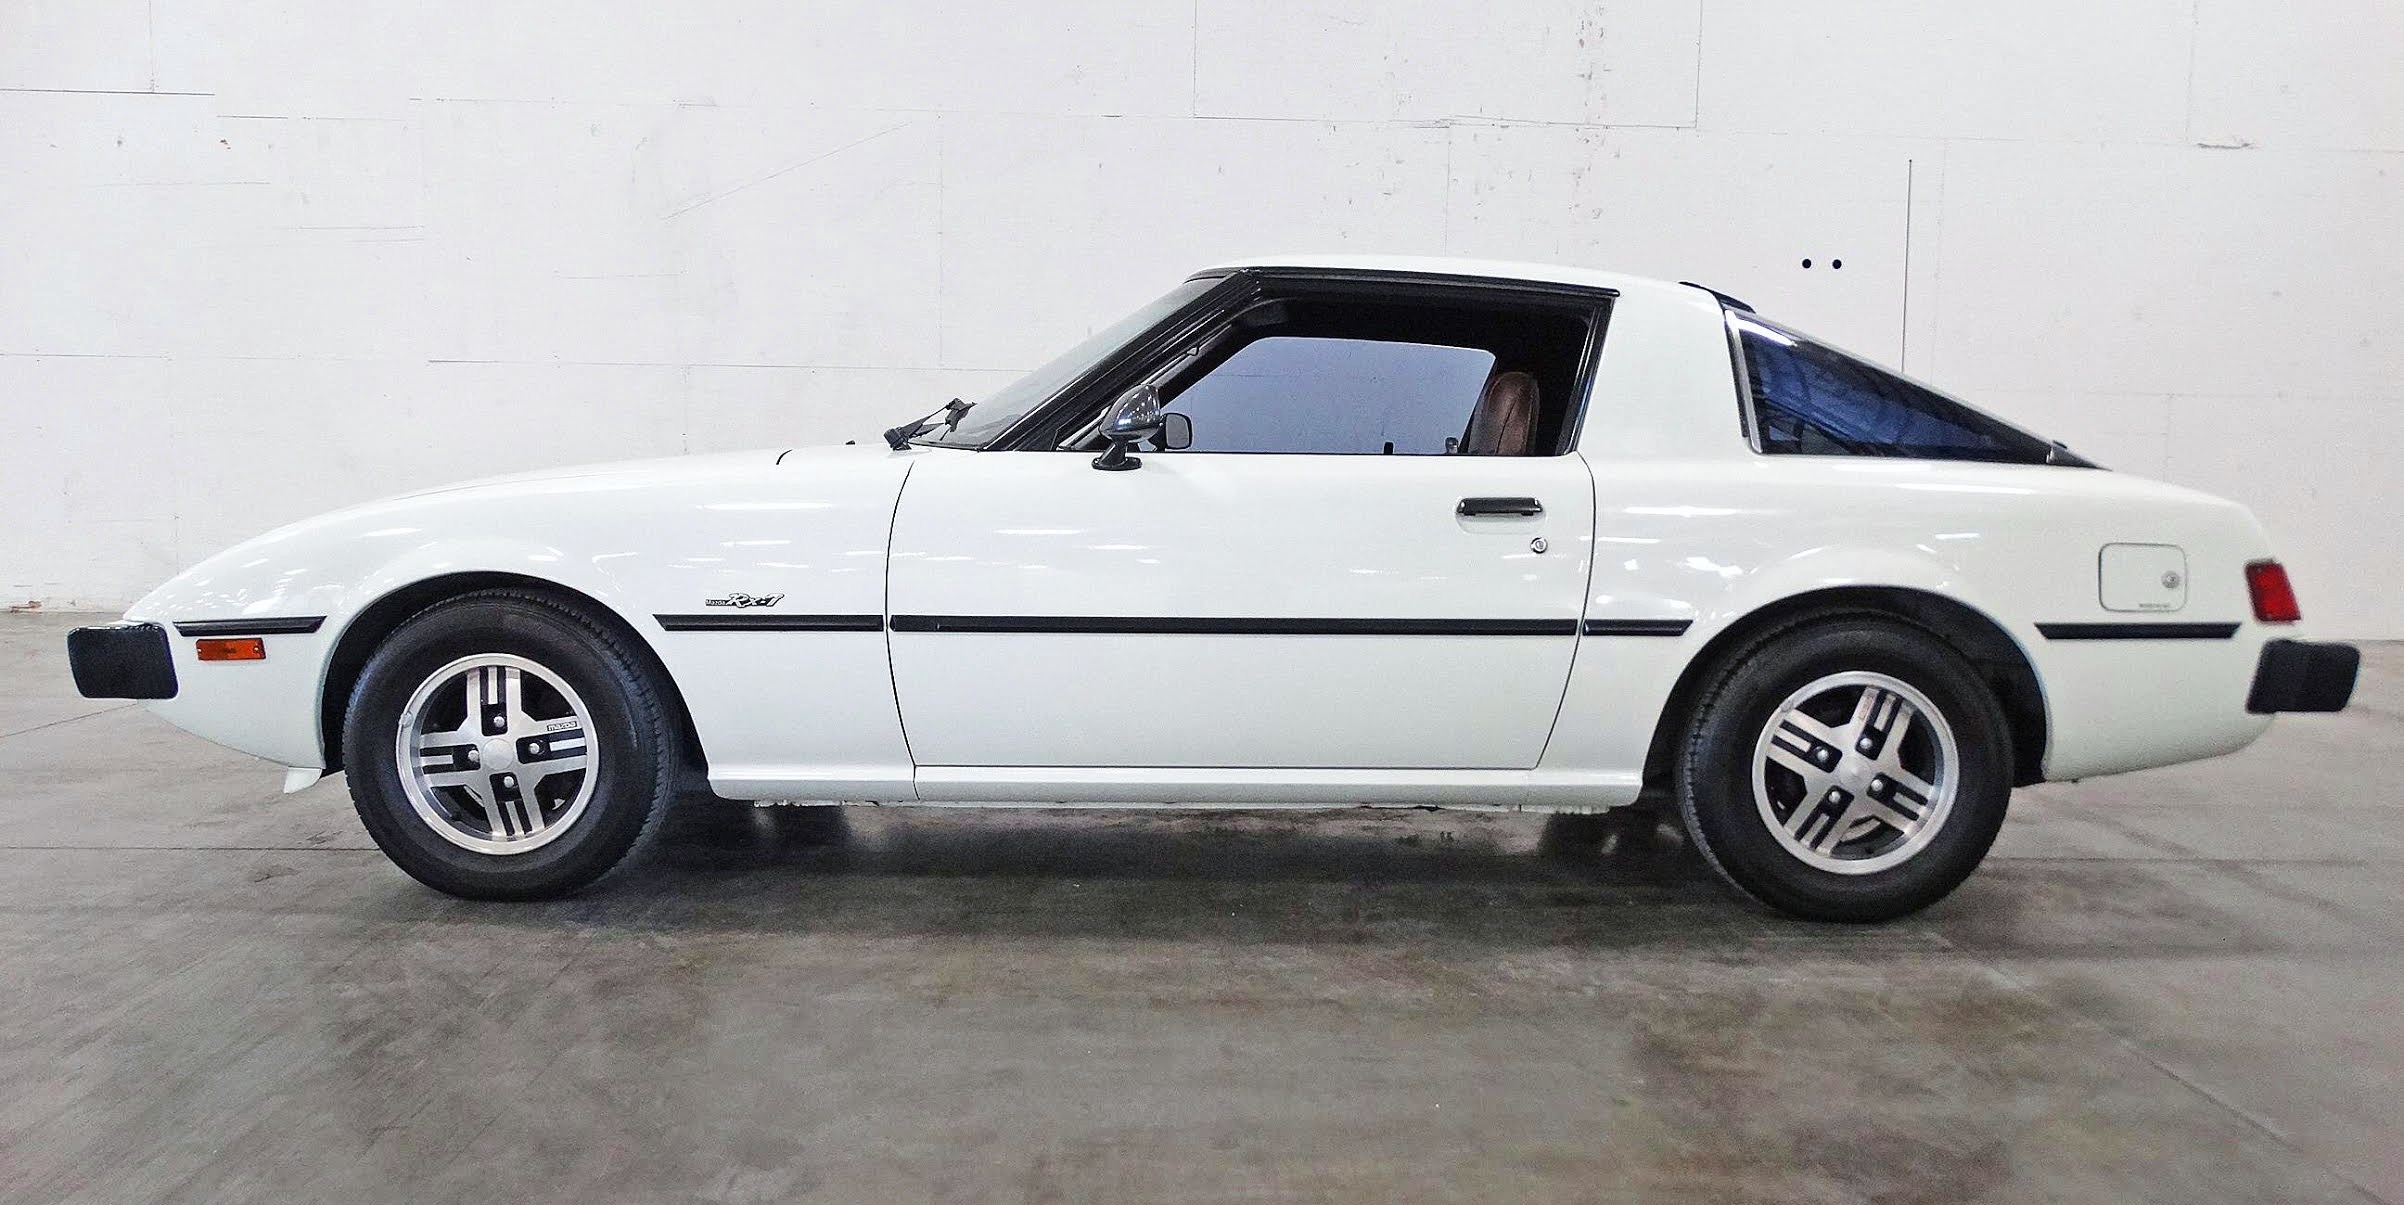 Mazda RX-7 is poised to take its place among Japanese collector cars 